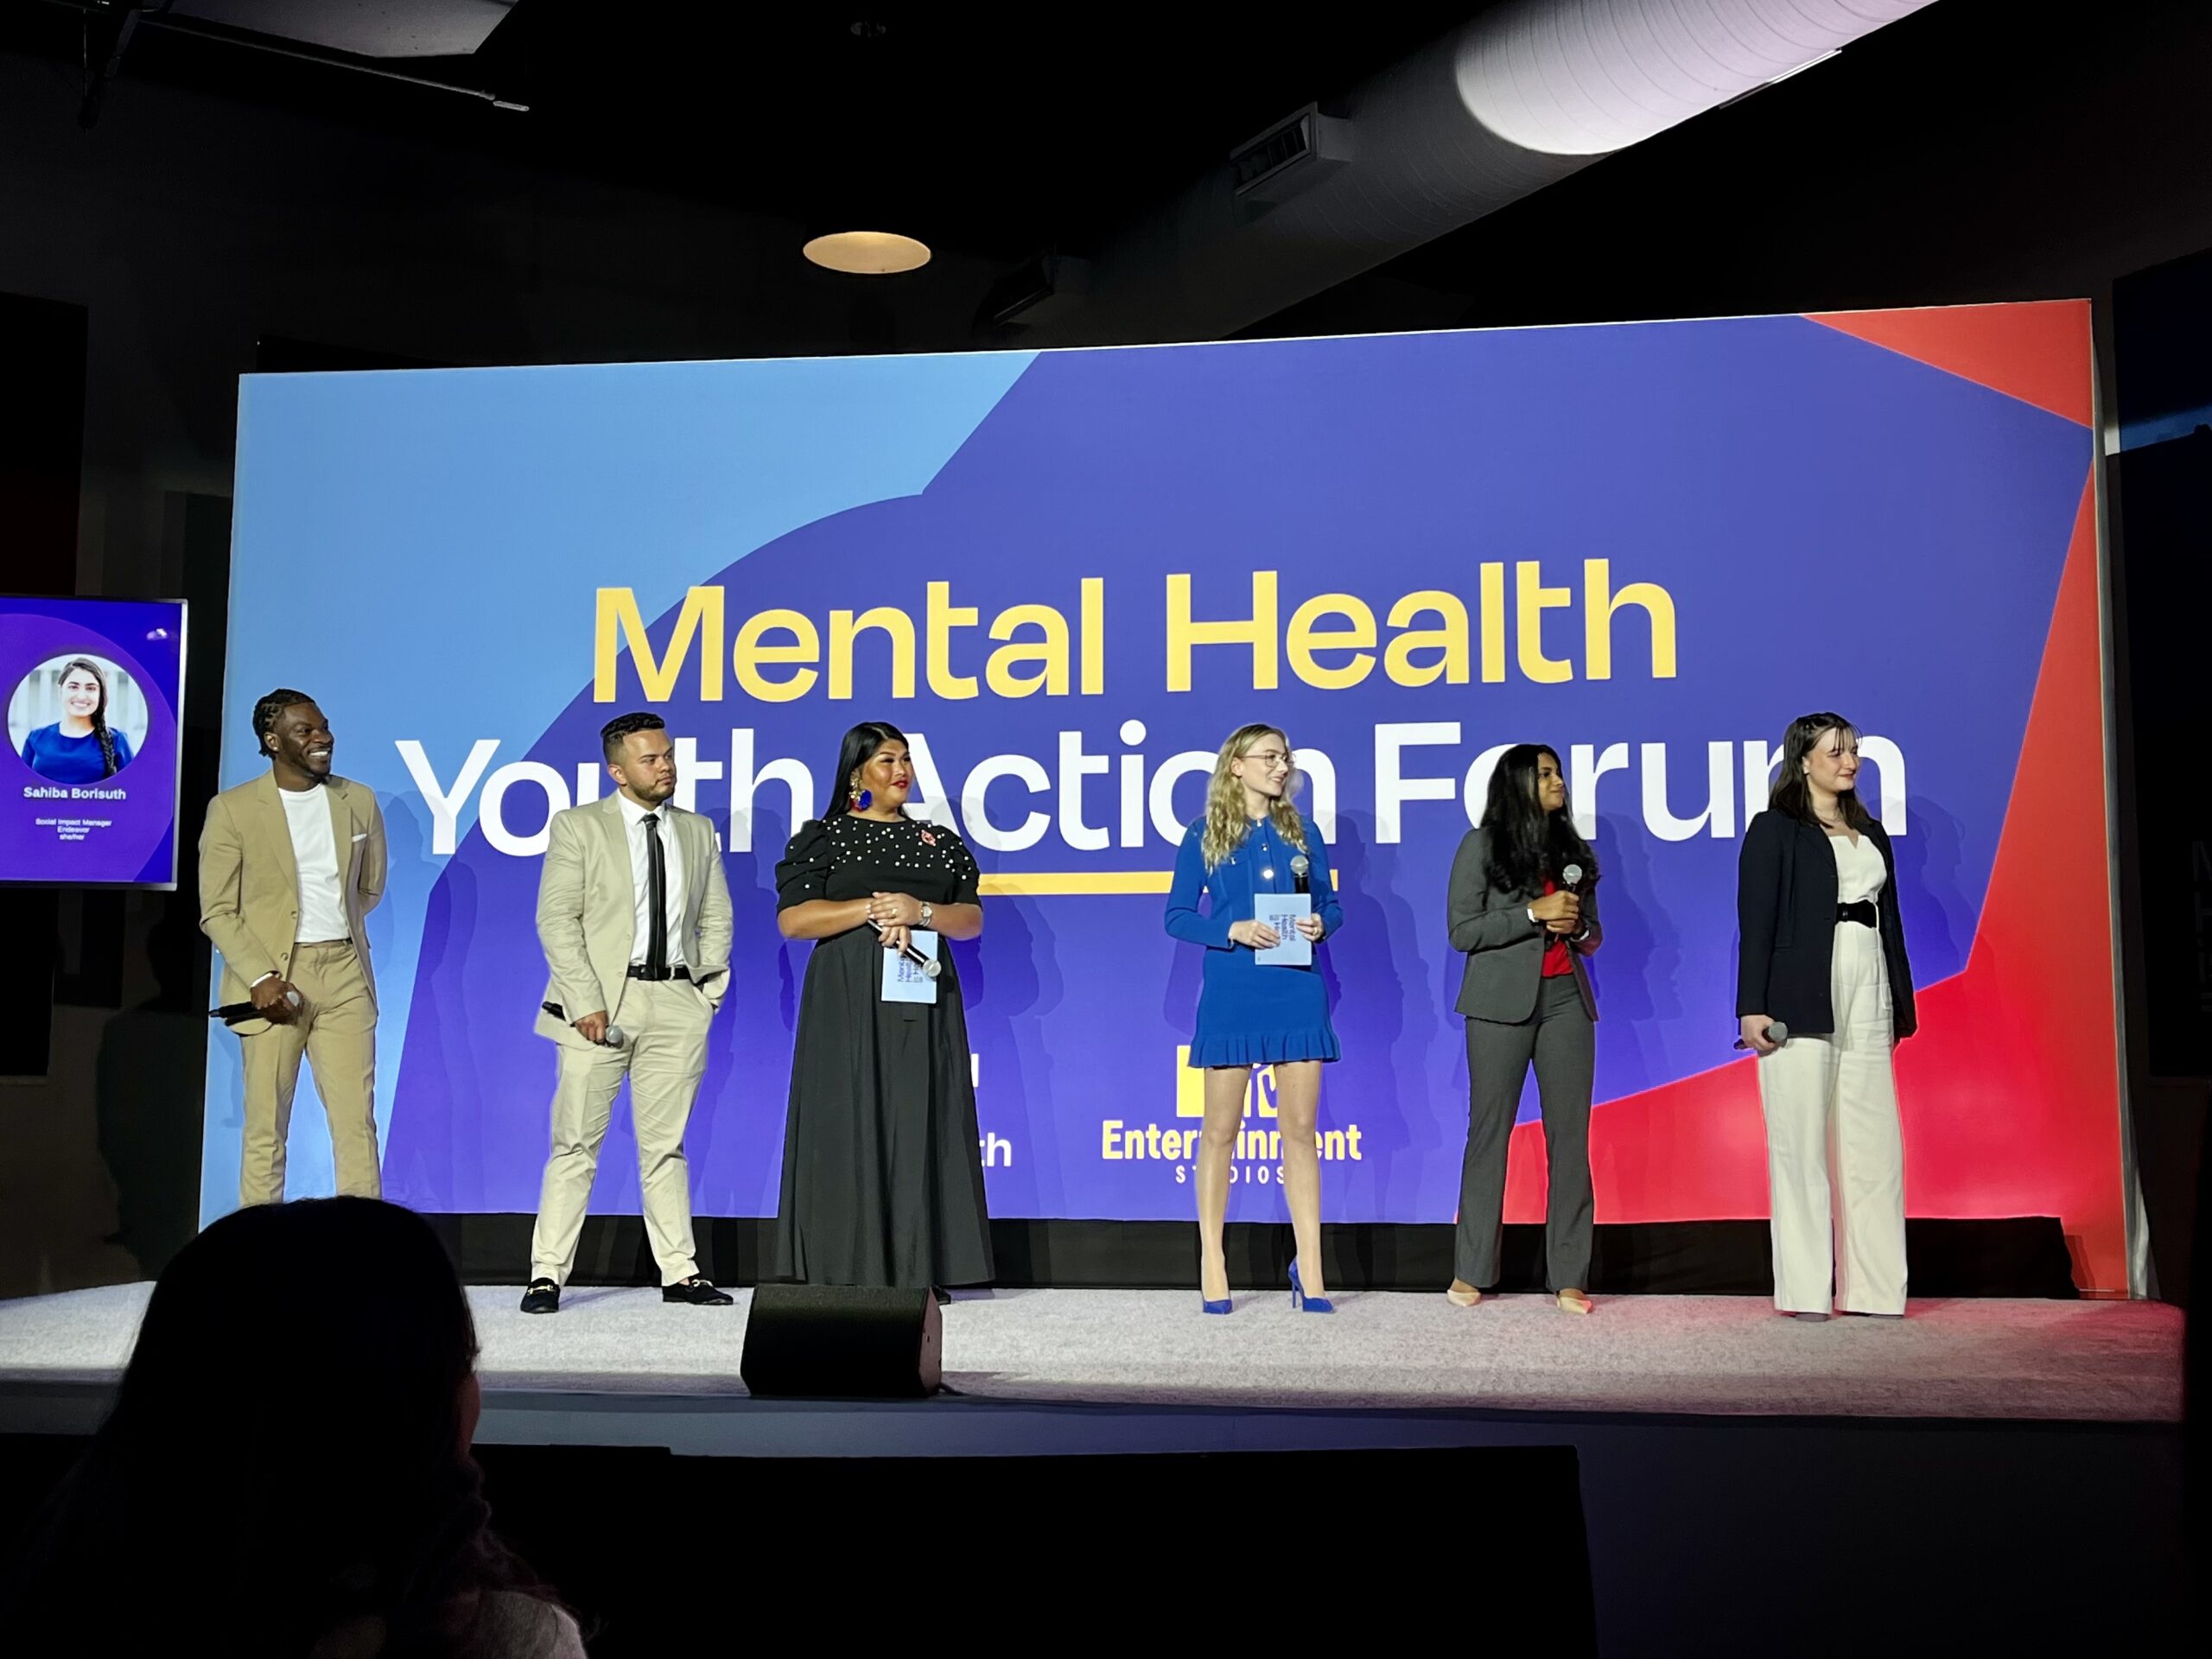 Carla Ibarra (third from left) and her group present at the MTV Mental Health Youth Action Forum.